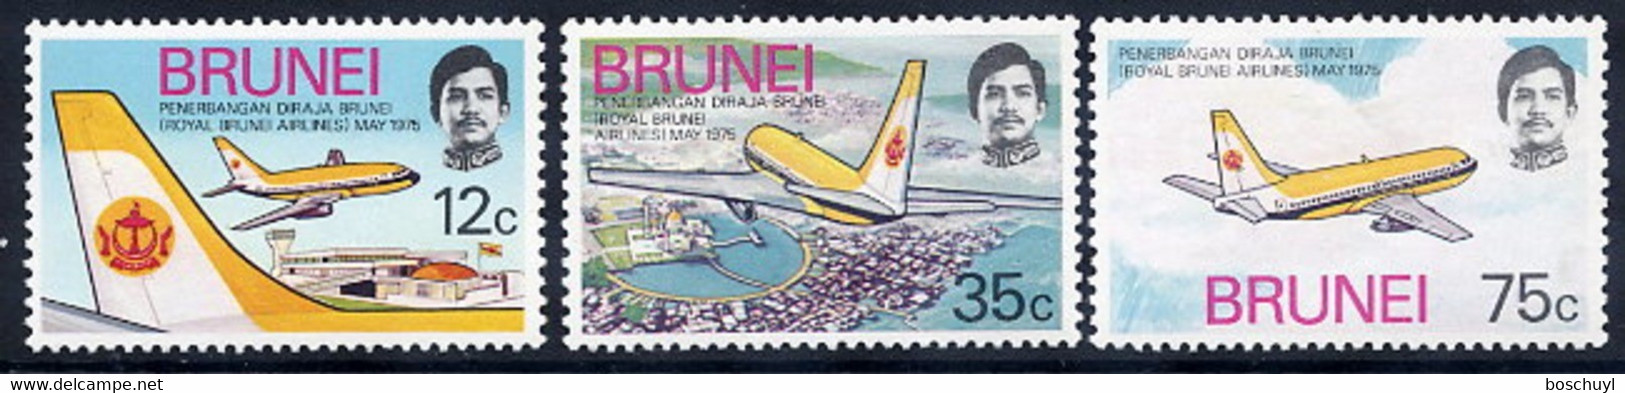 Brunei, 1975, Royal Airlines, Airplanes, Aviation, MNH, Michel 211-213 - Brunei (...-1984)